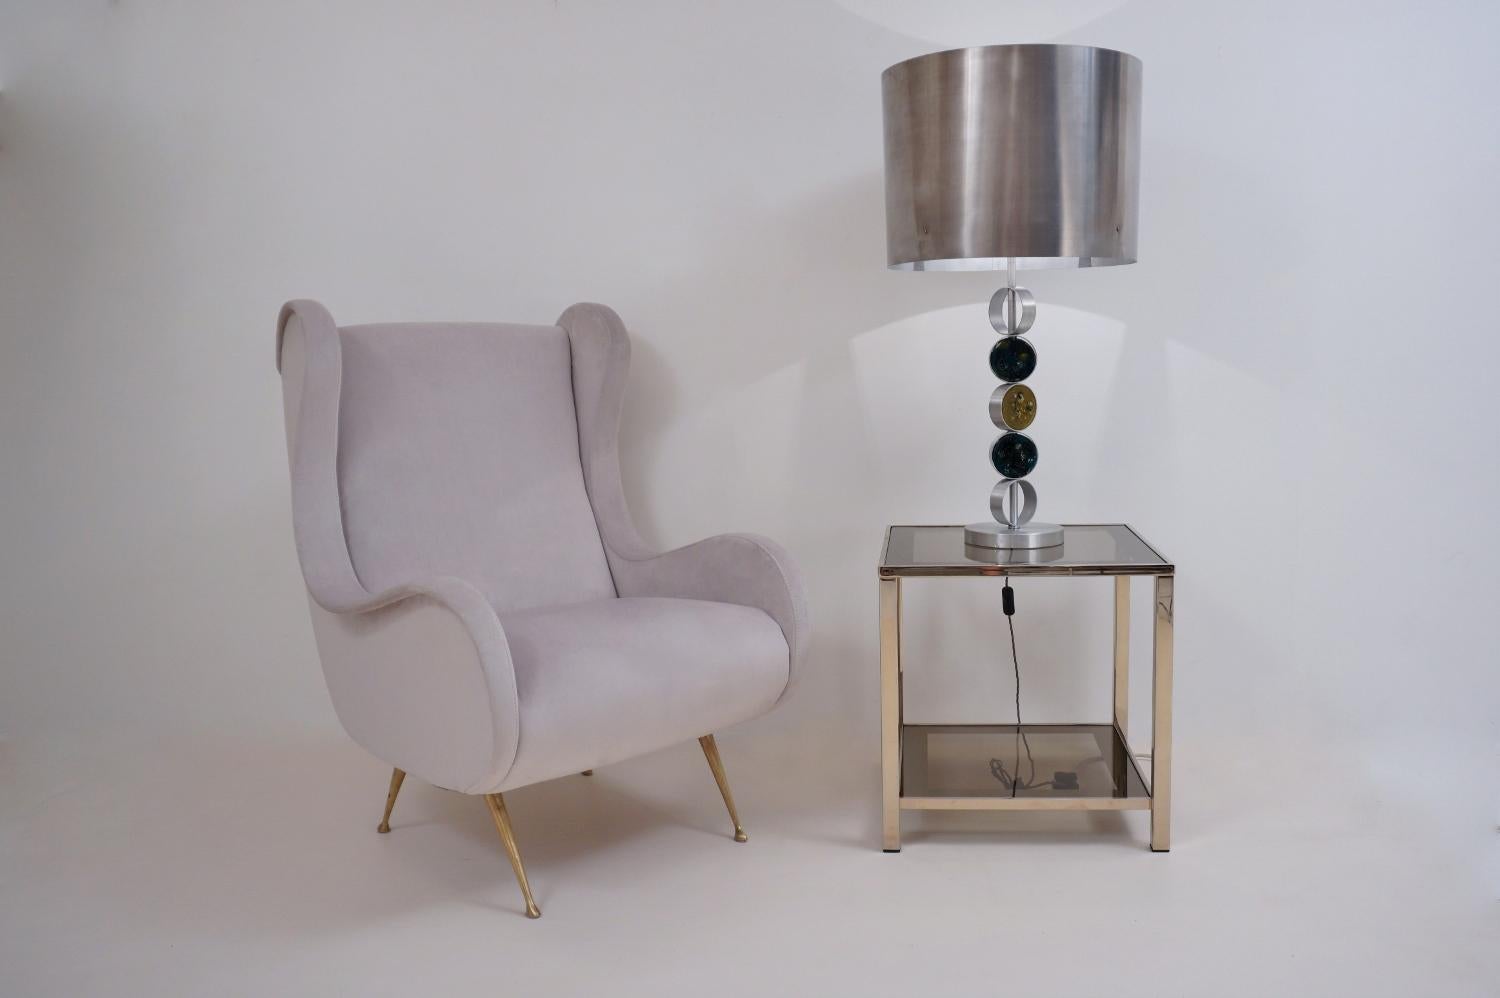 RAAK Table Lamp by Nanny Still, Aluminium, Steel & Glass, 1972, Dutch In Good Condition For Sale In London, GB